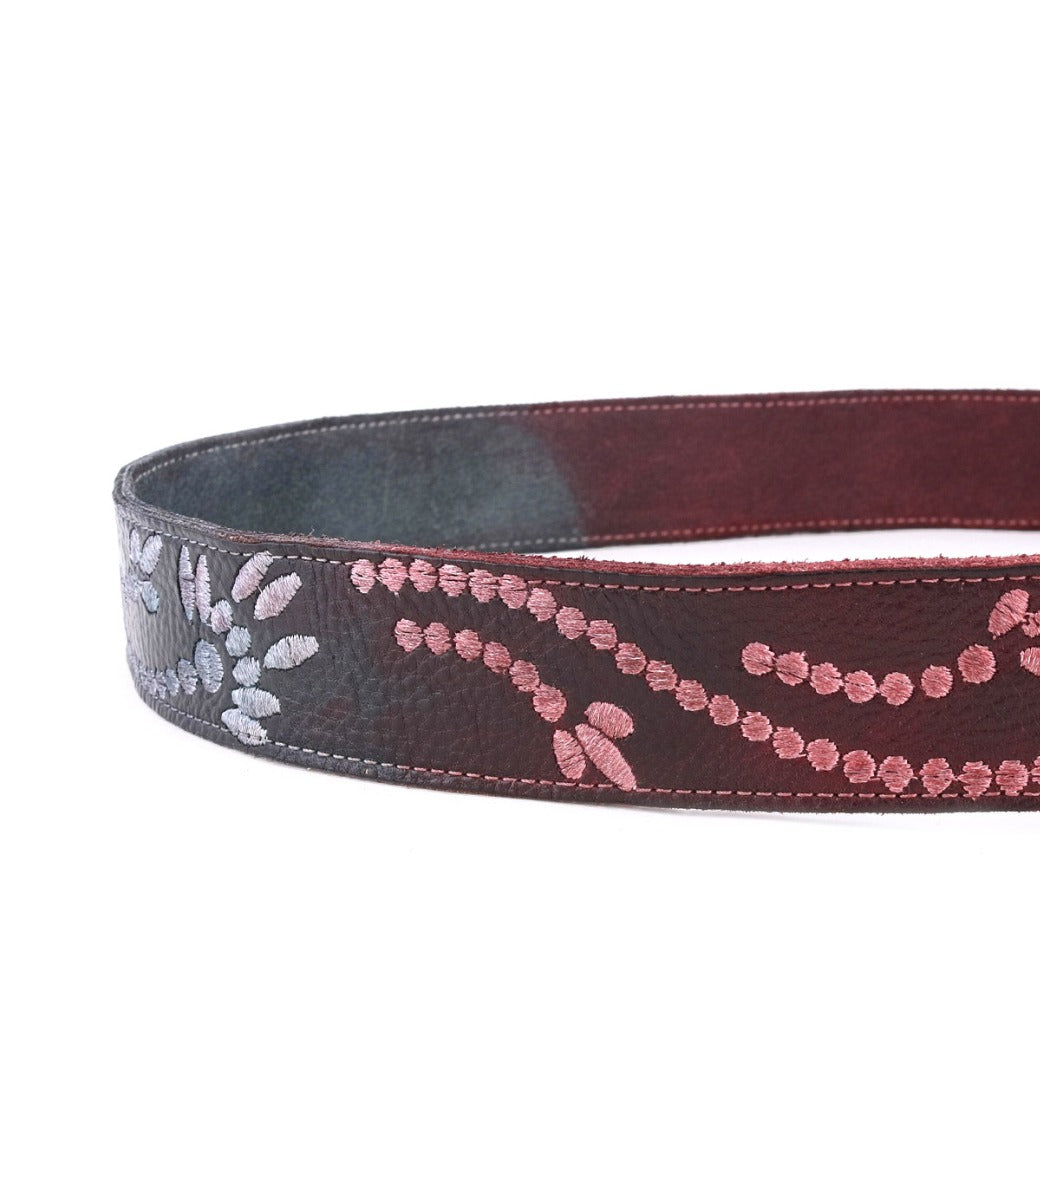 A Mohawk belt by Bed Stu with pink and black beads on it.